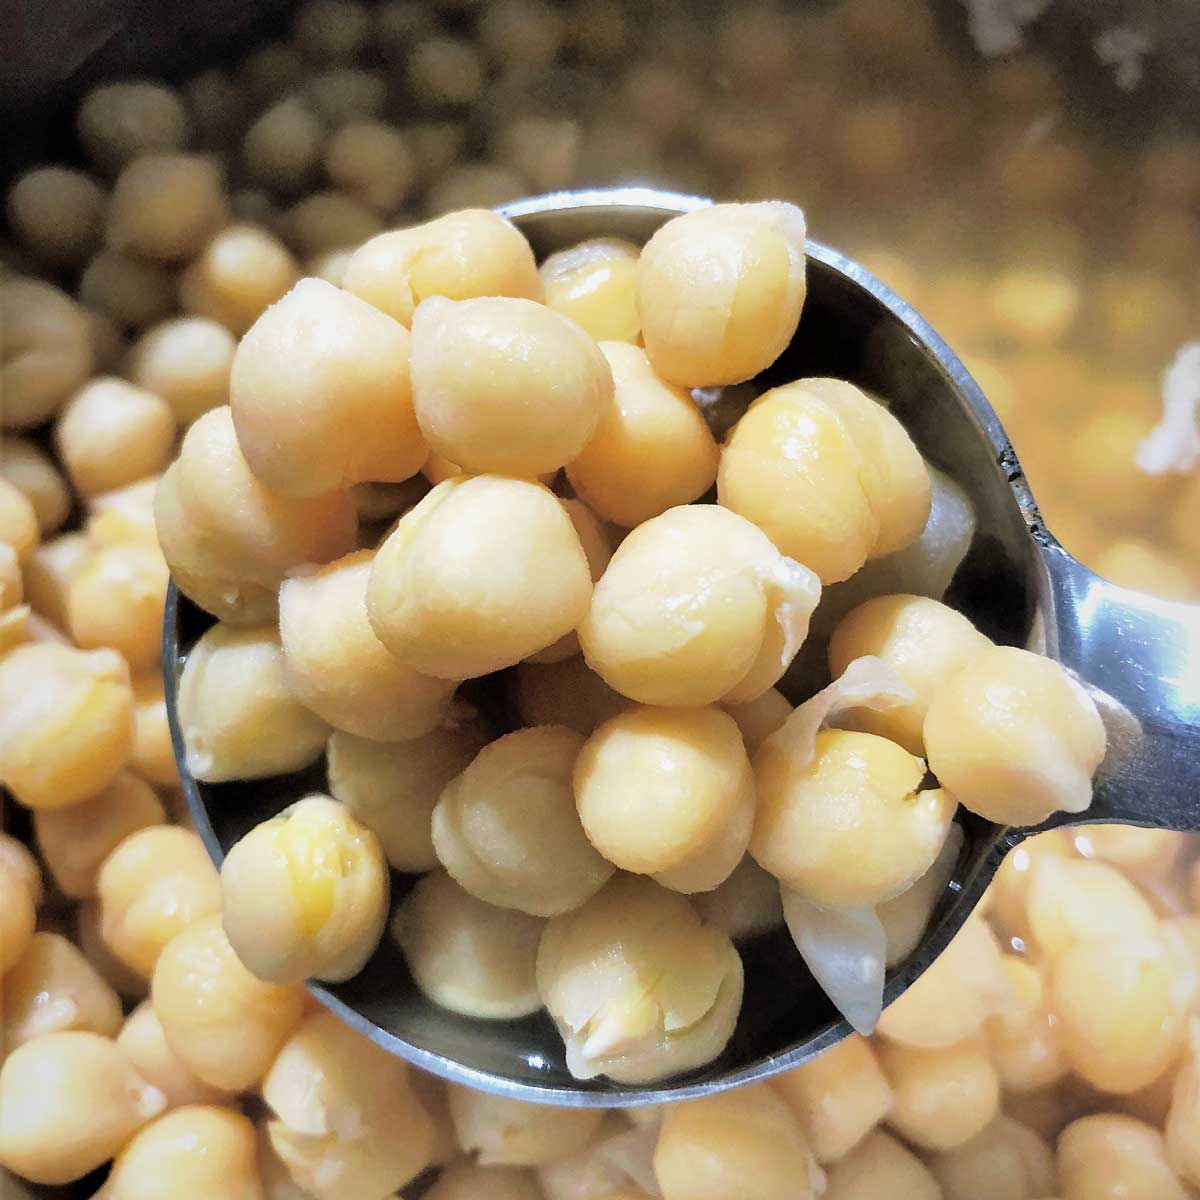 Boiled chickpeas for Hummus.